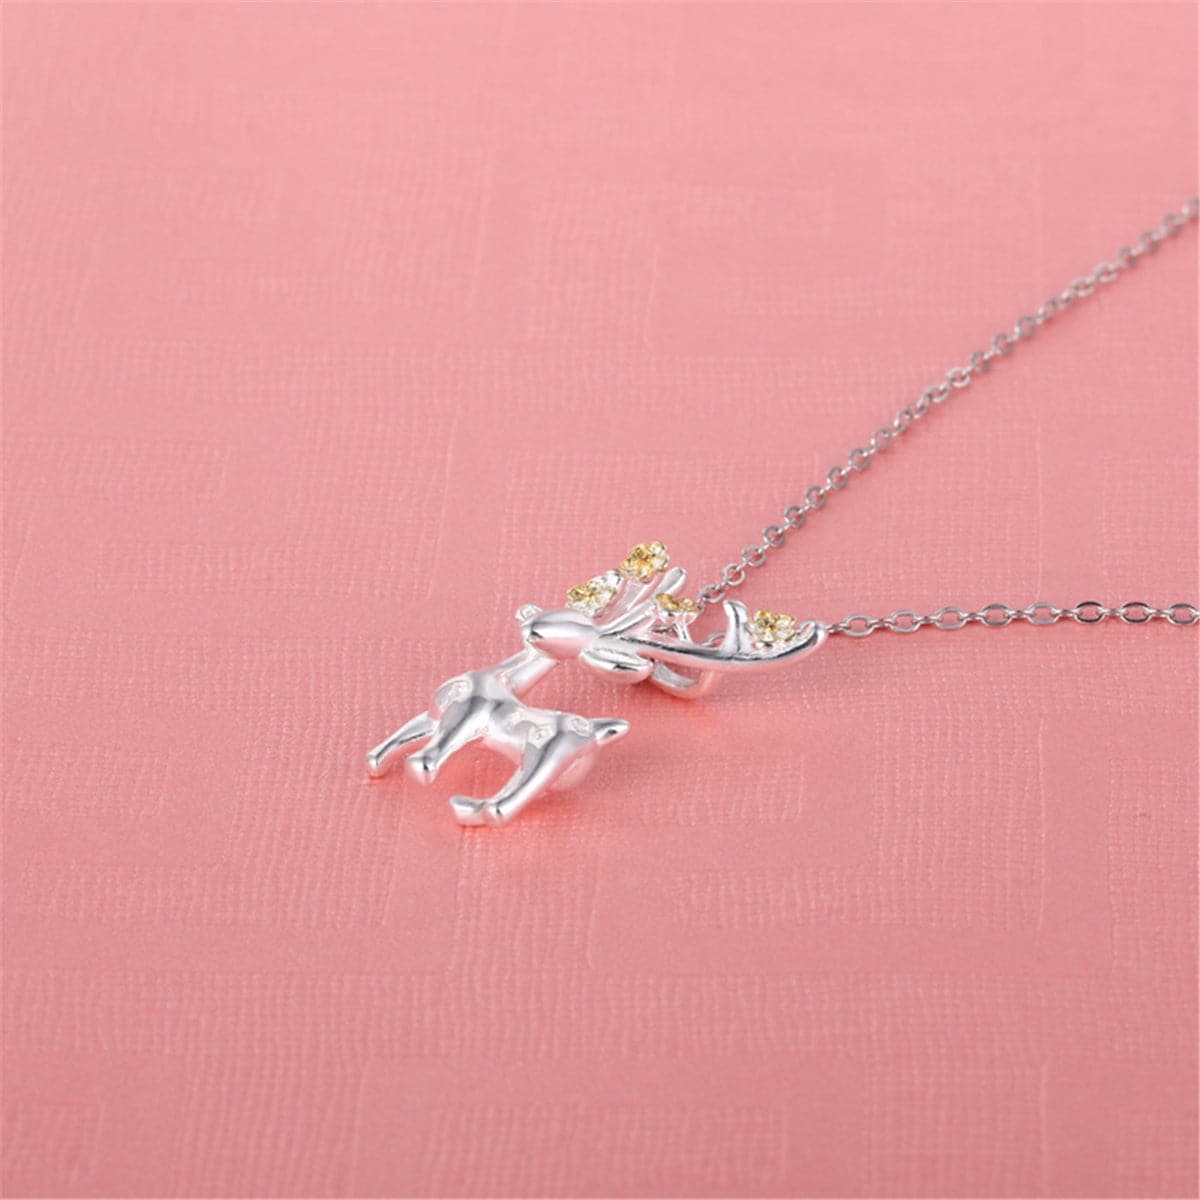 Two-Tone Deer Pendant Necklace